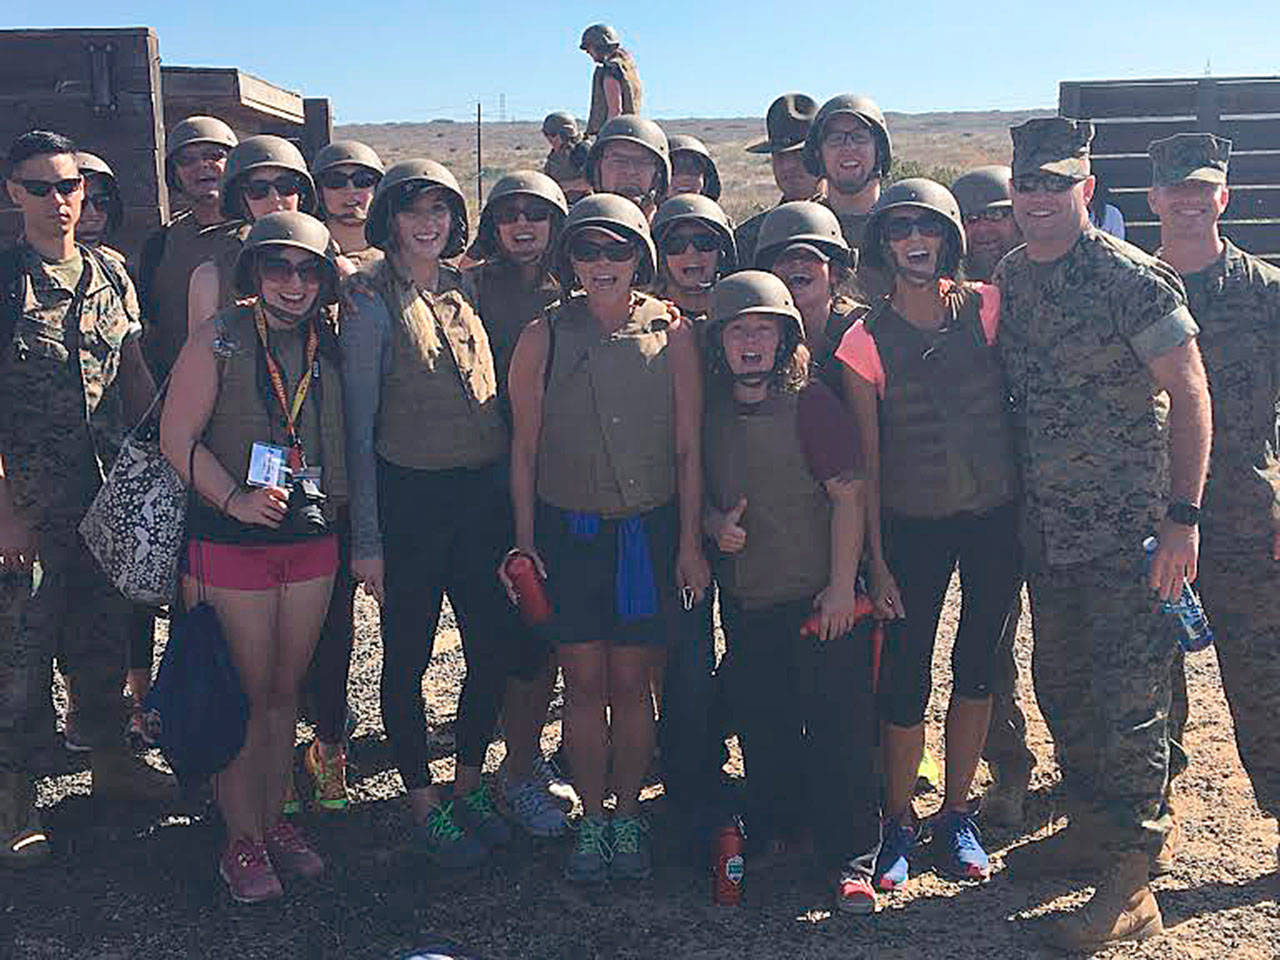 The Seattle educators at the Marine Corps Educators Workshop in Camp Pendleton. Photo courtesy of Abby Durrett